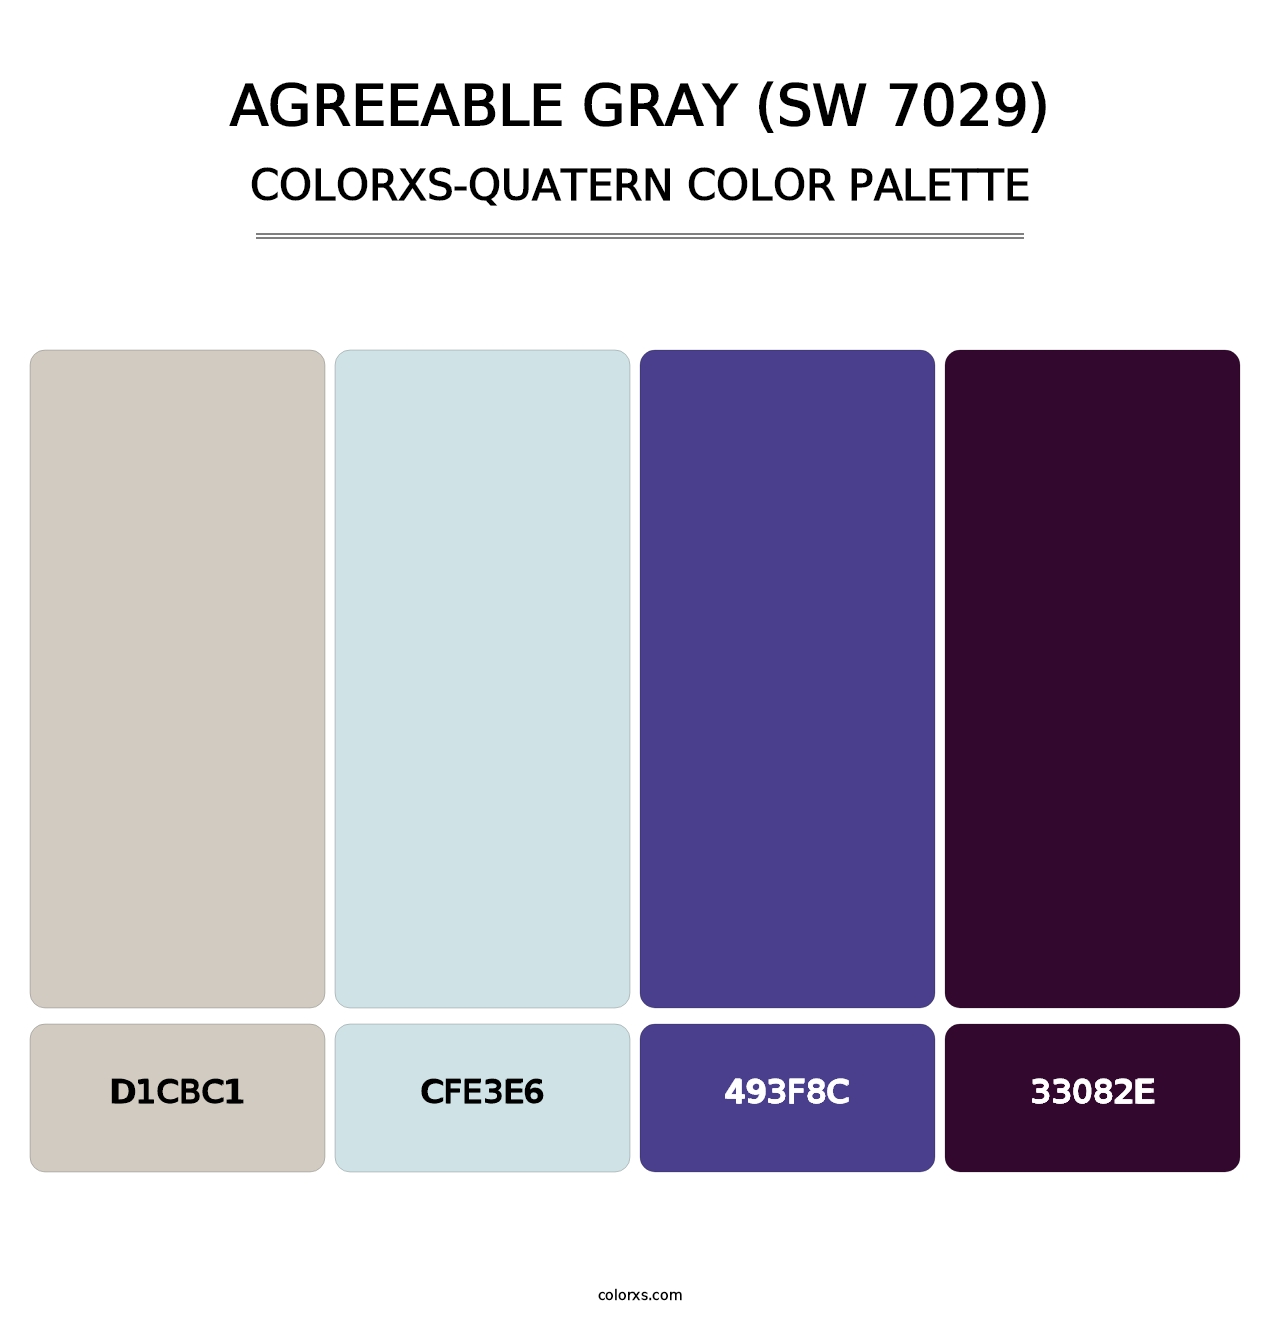 Agreeable Gray (SW 7029) - Colorxs Quatern Palette